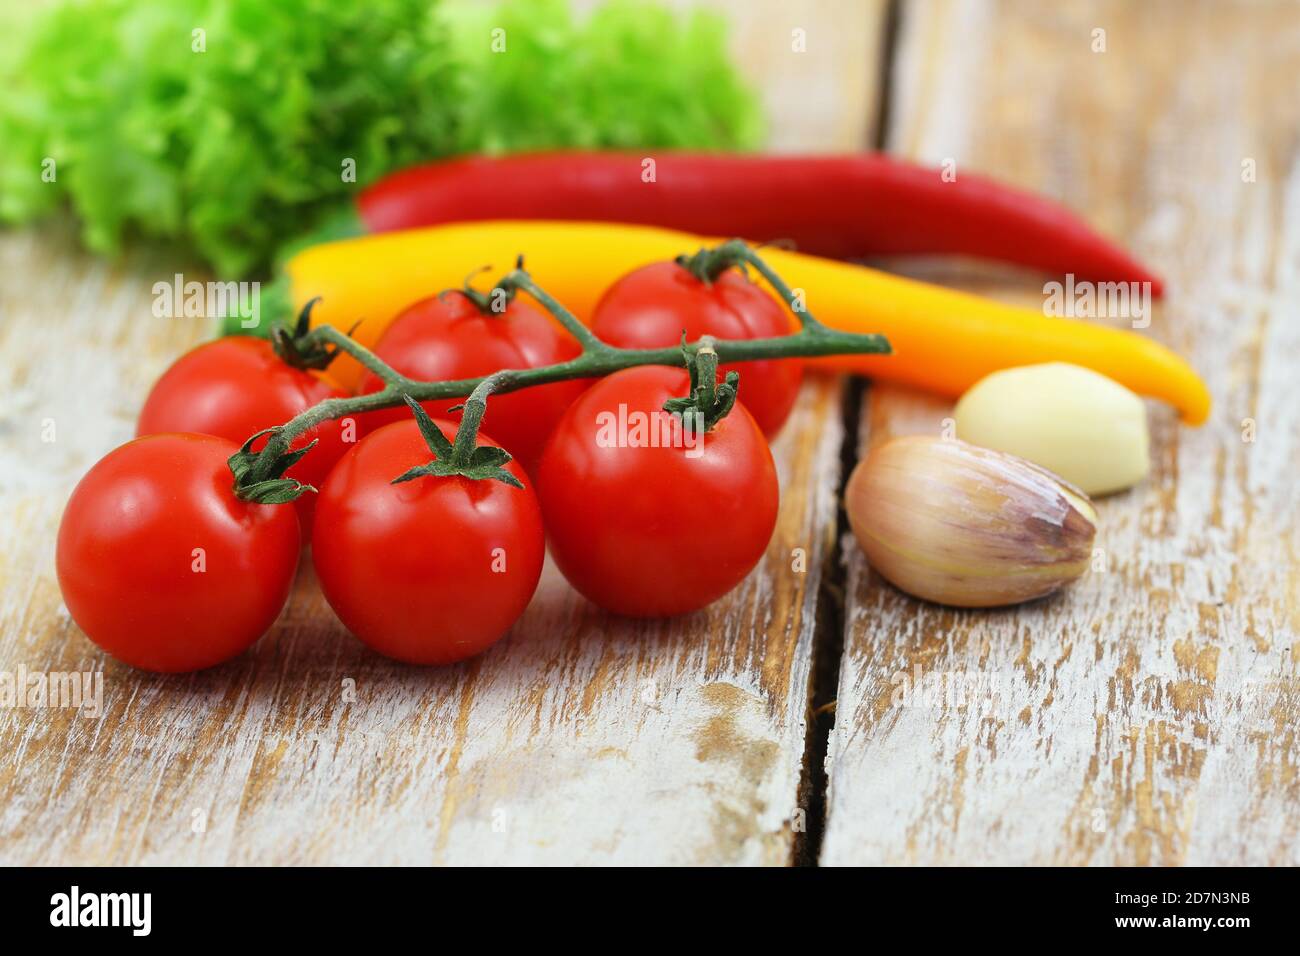 Selection of cooking ingredients: cherry tomatoes, garlic cloves and chilies on wooden surface Stock Photo